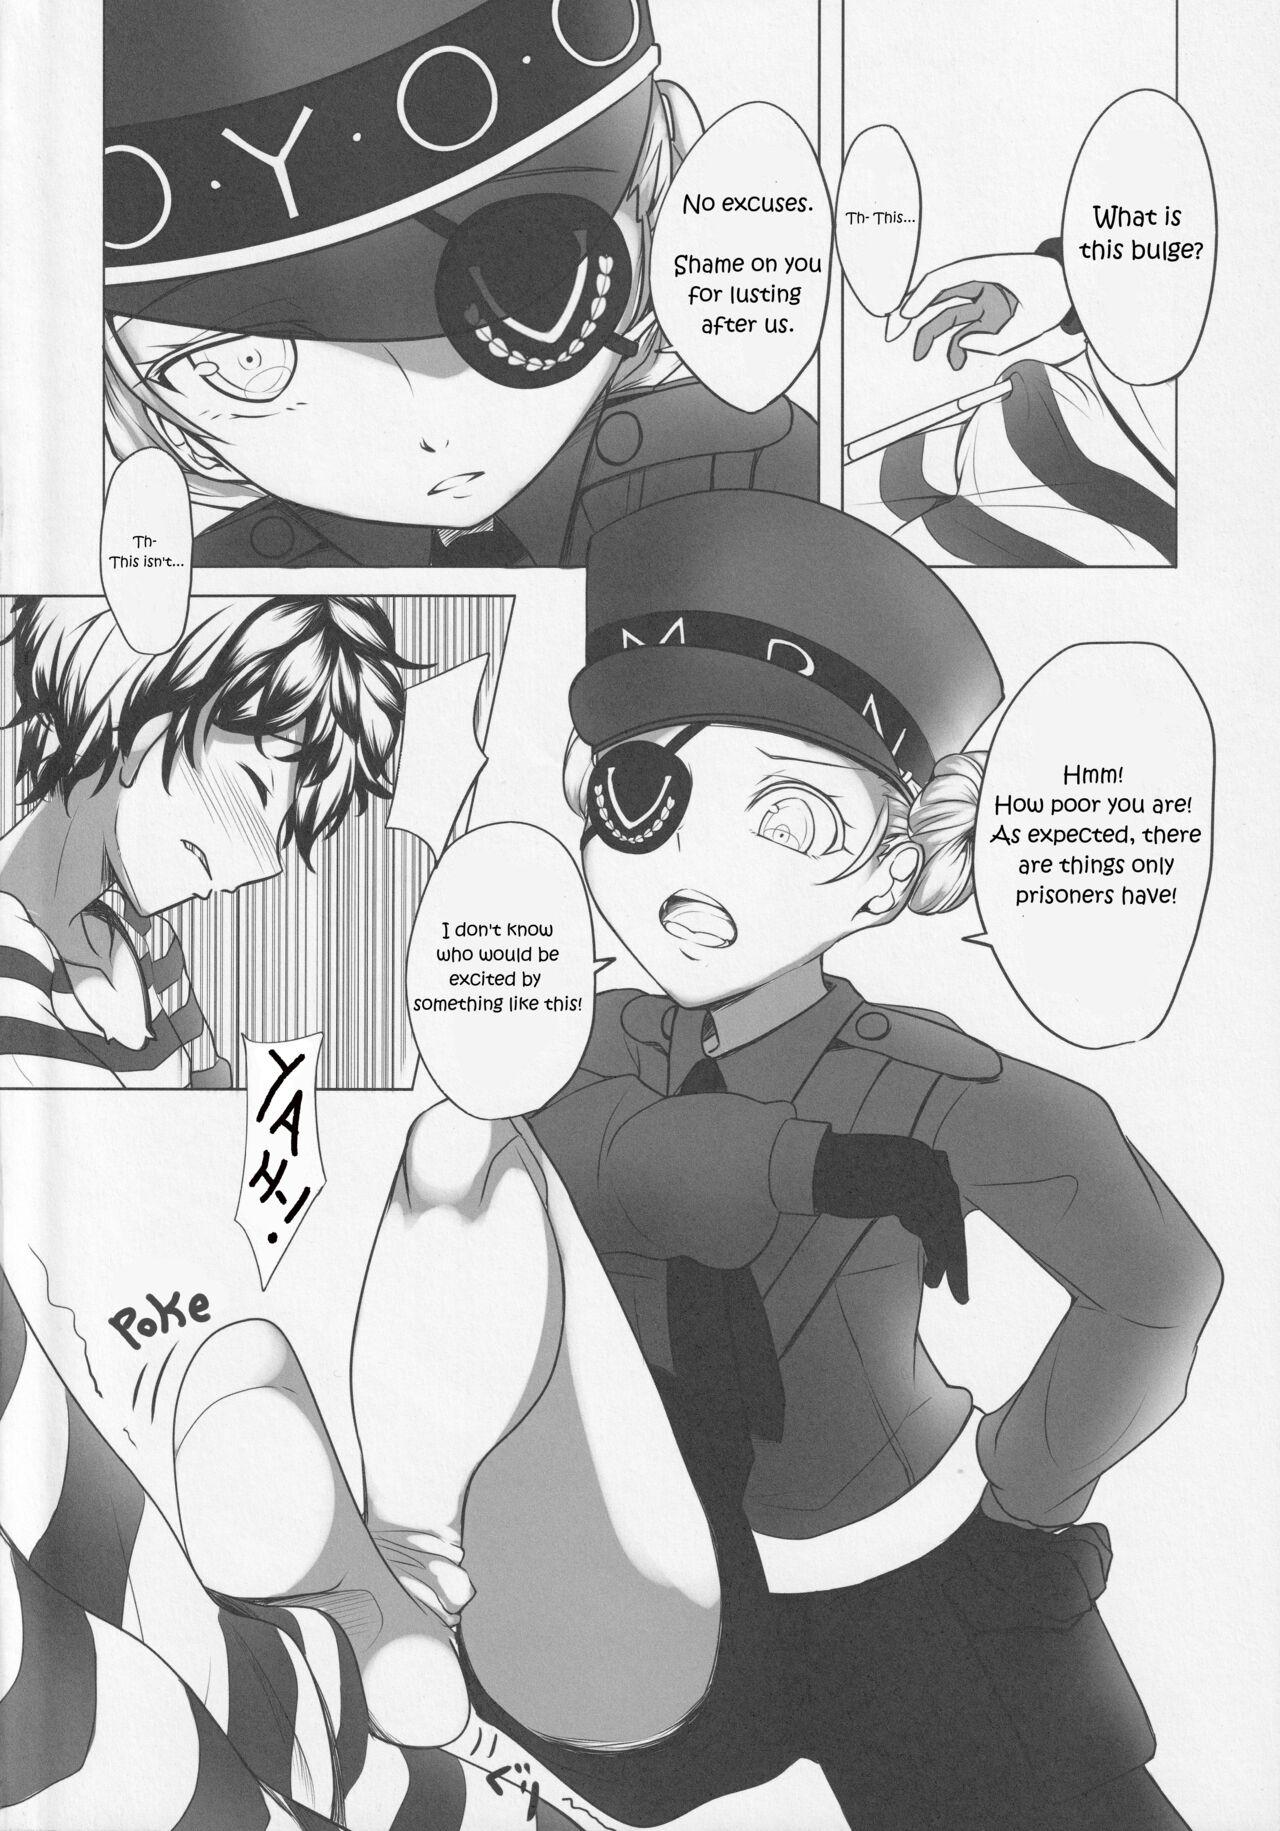 Hardcore Gay Sounds Like You Need a Revive! - Persona 5 Oldman - Page 3